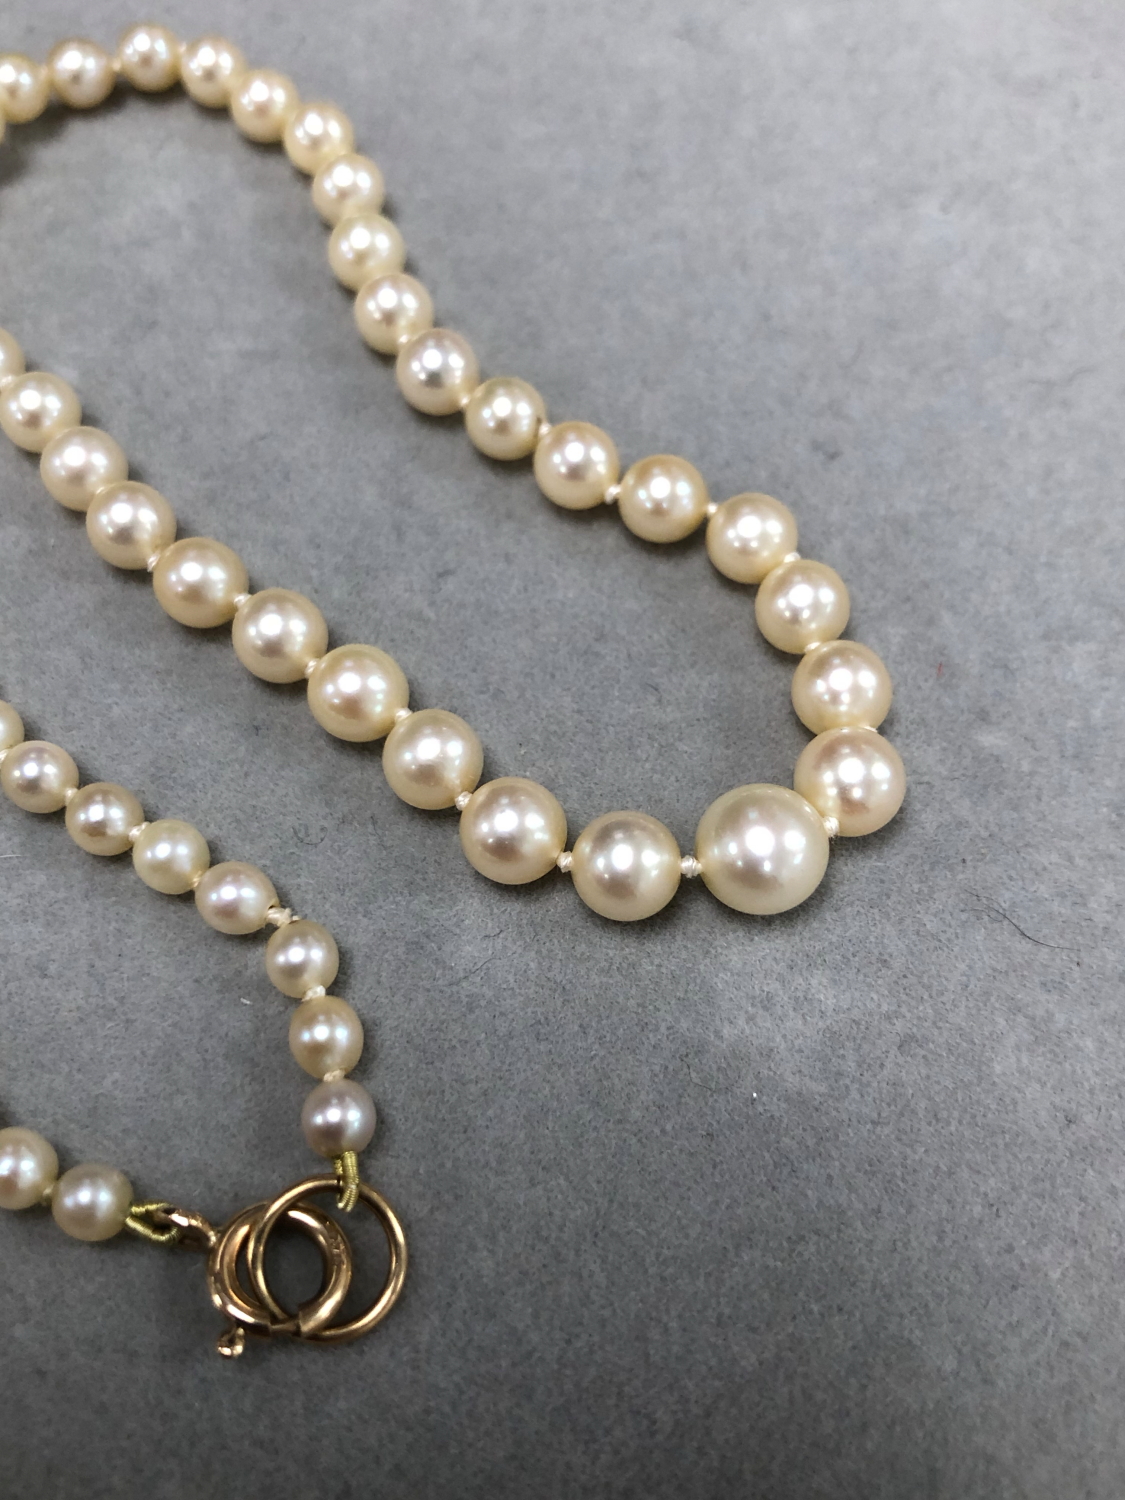 A PRINCESS ROW OF GRADUATED CULTURED PEARLS, KNOTTED WITH GOLD FITTINGS. LENGTH 46cms. - Image 3 of 3